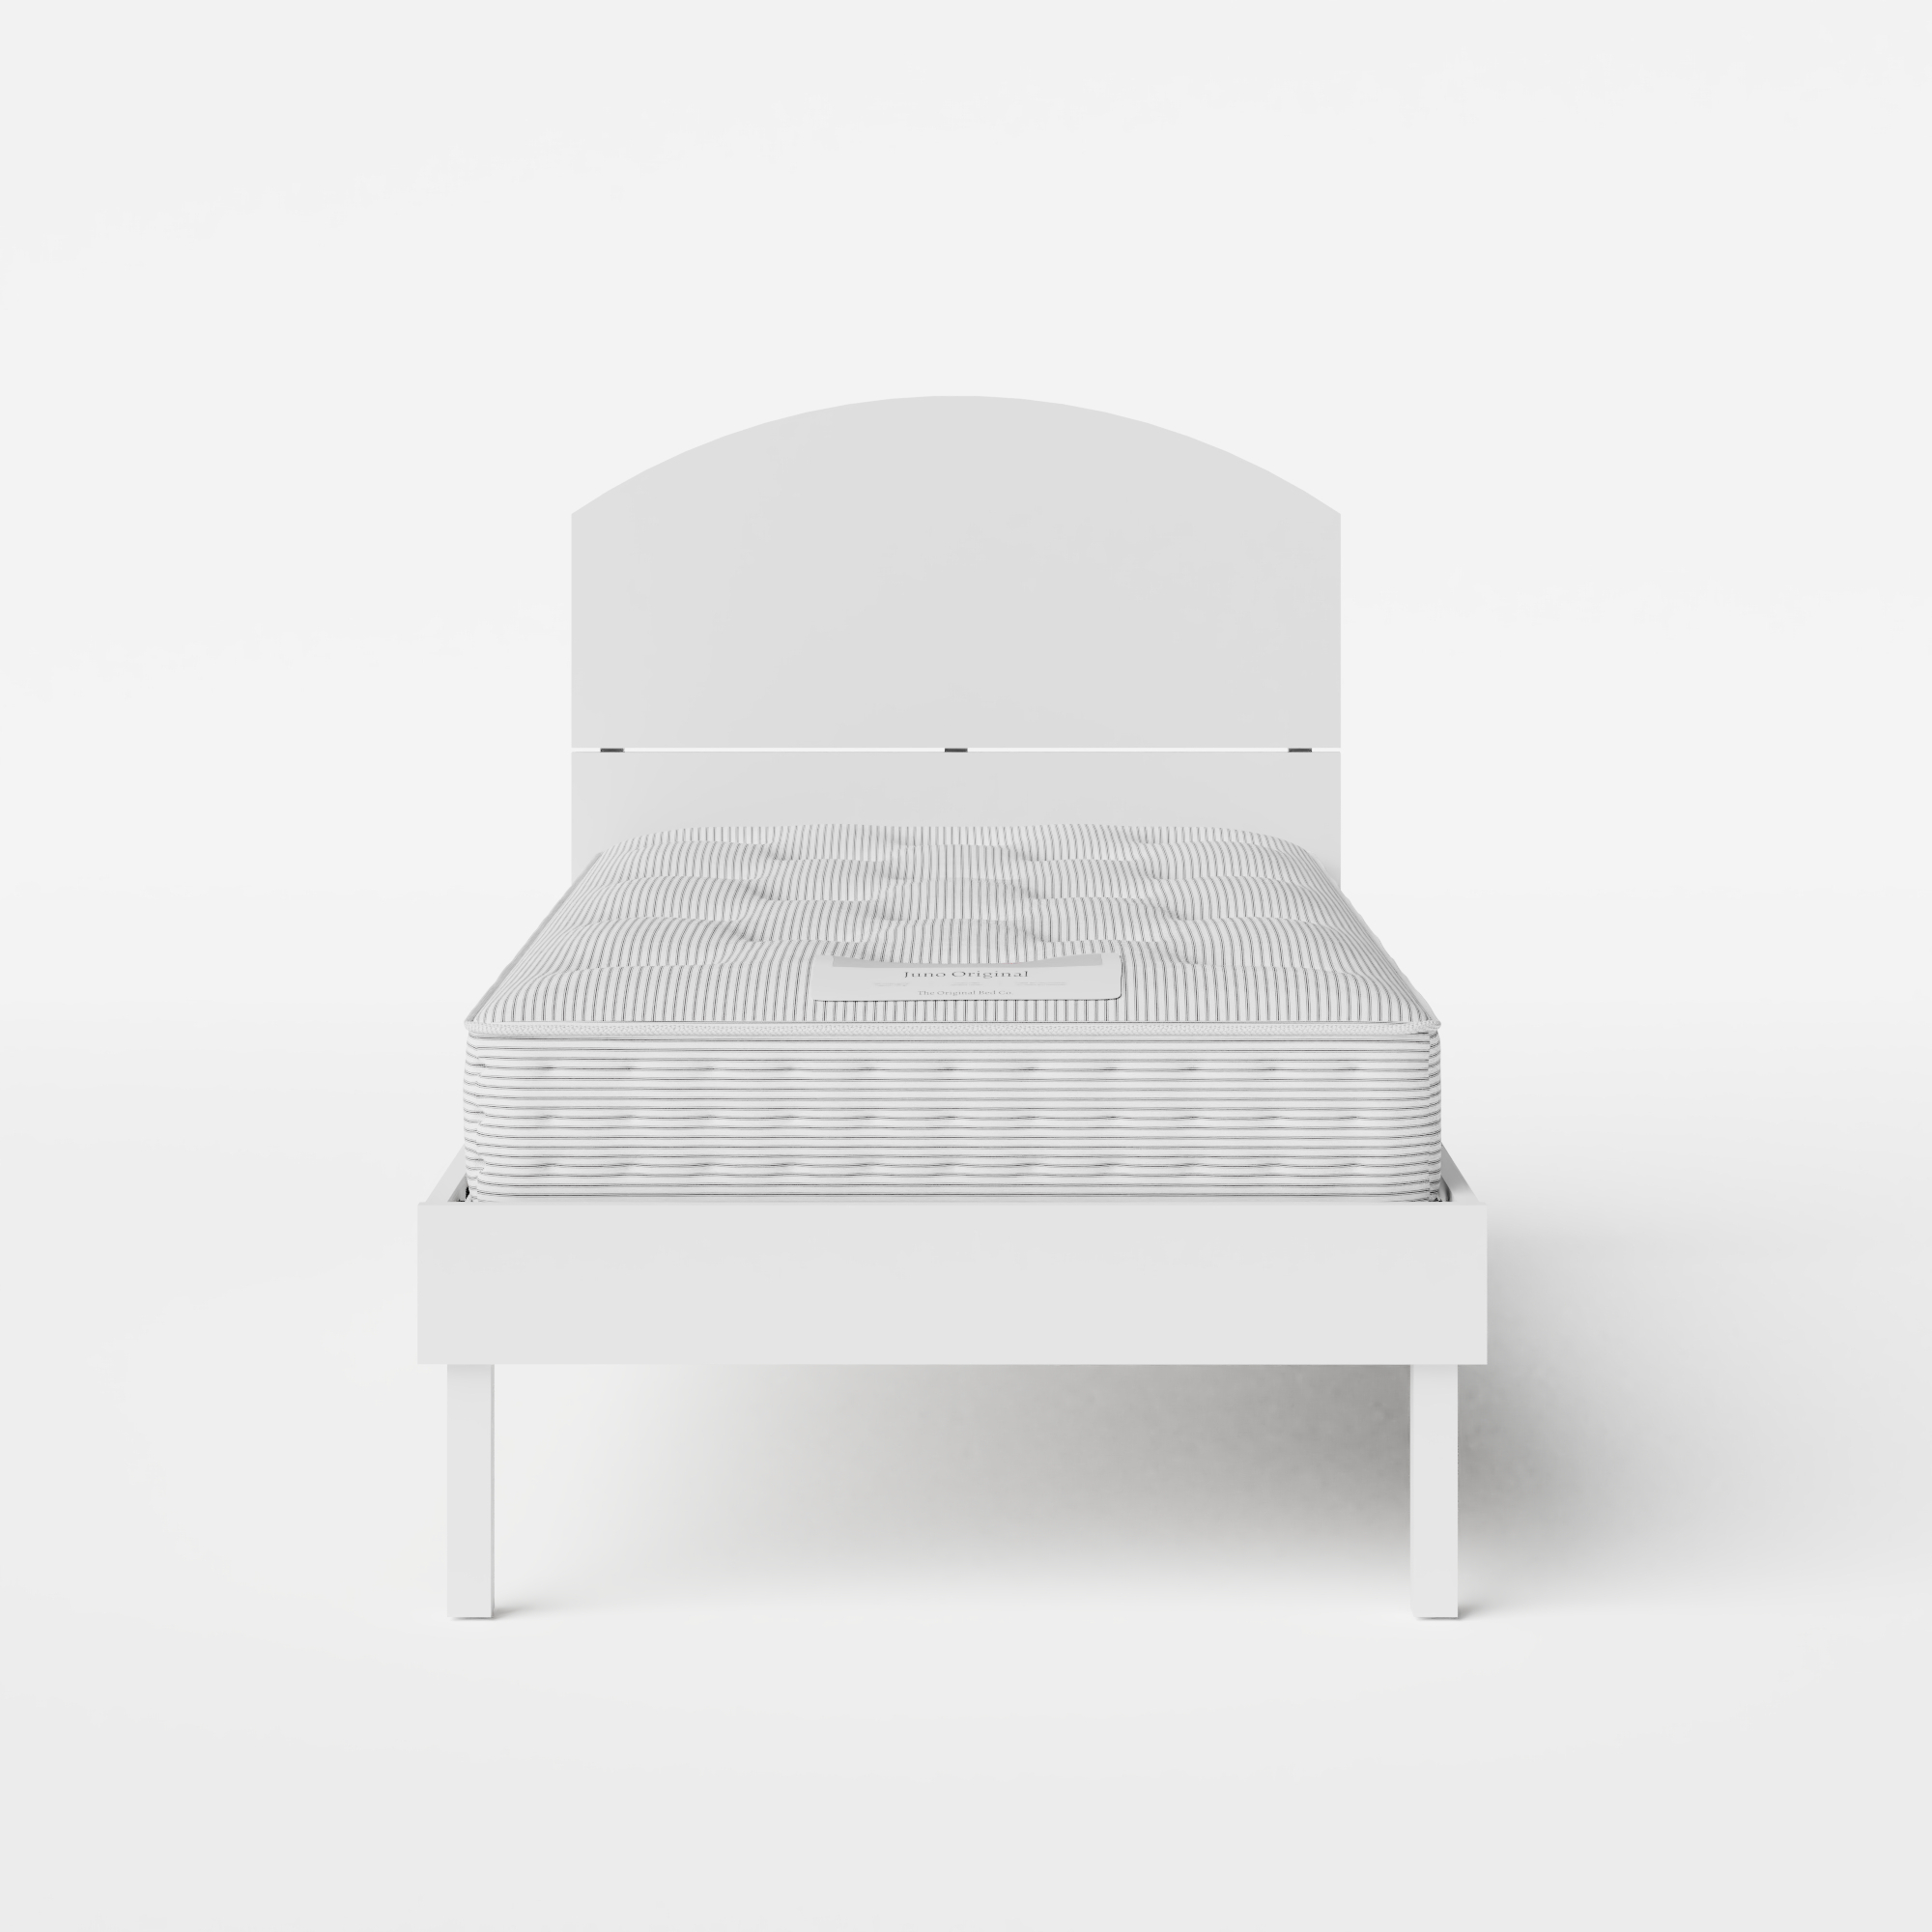 Okawa Painted single painted wood bed in white with Juno mattress